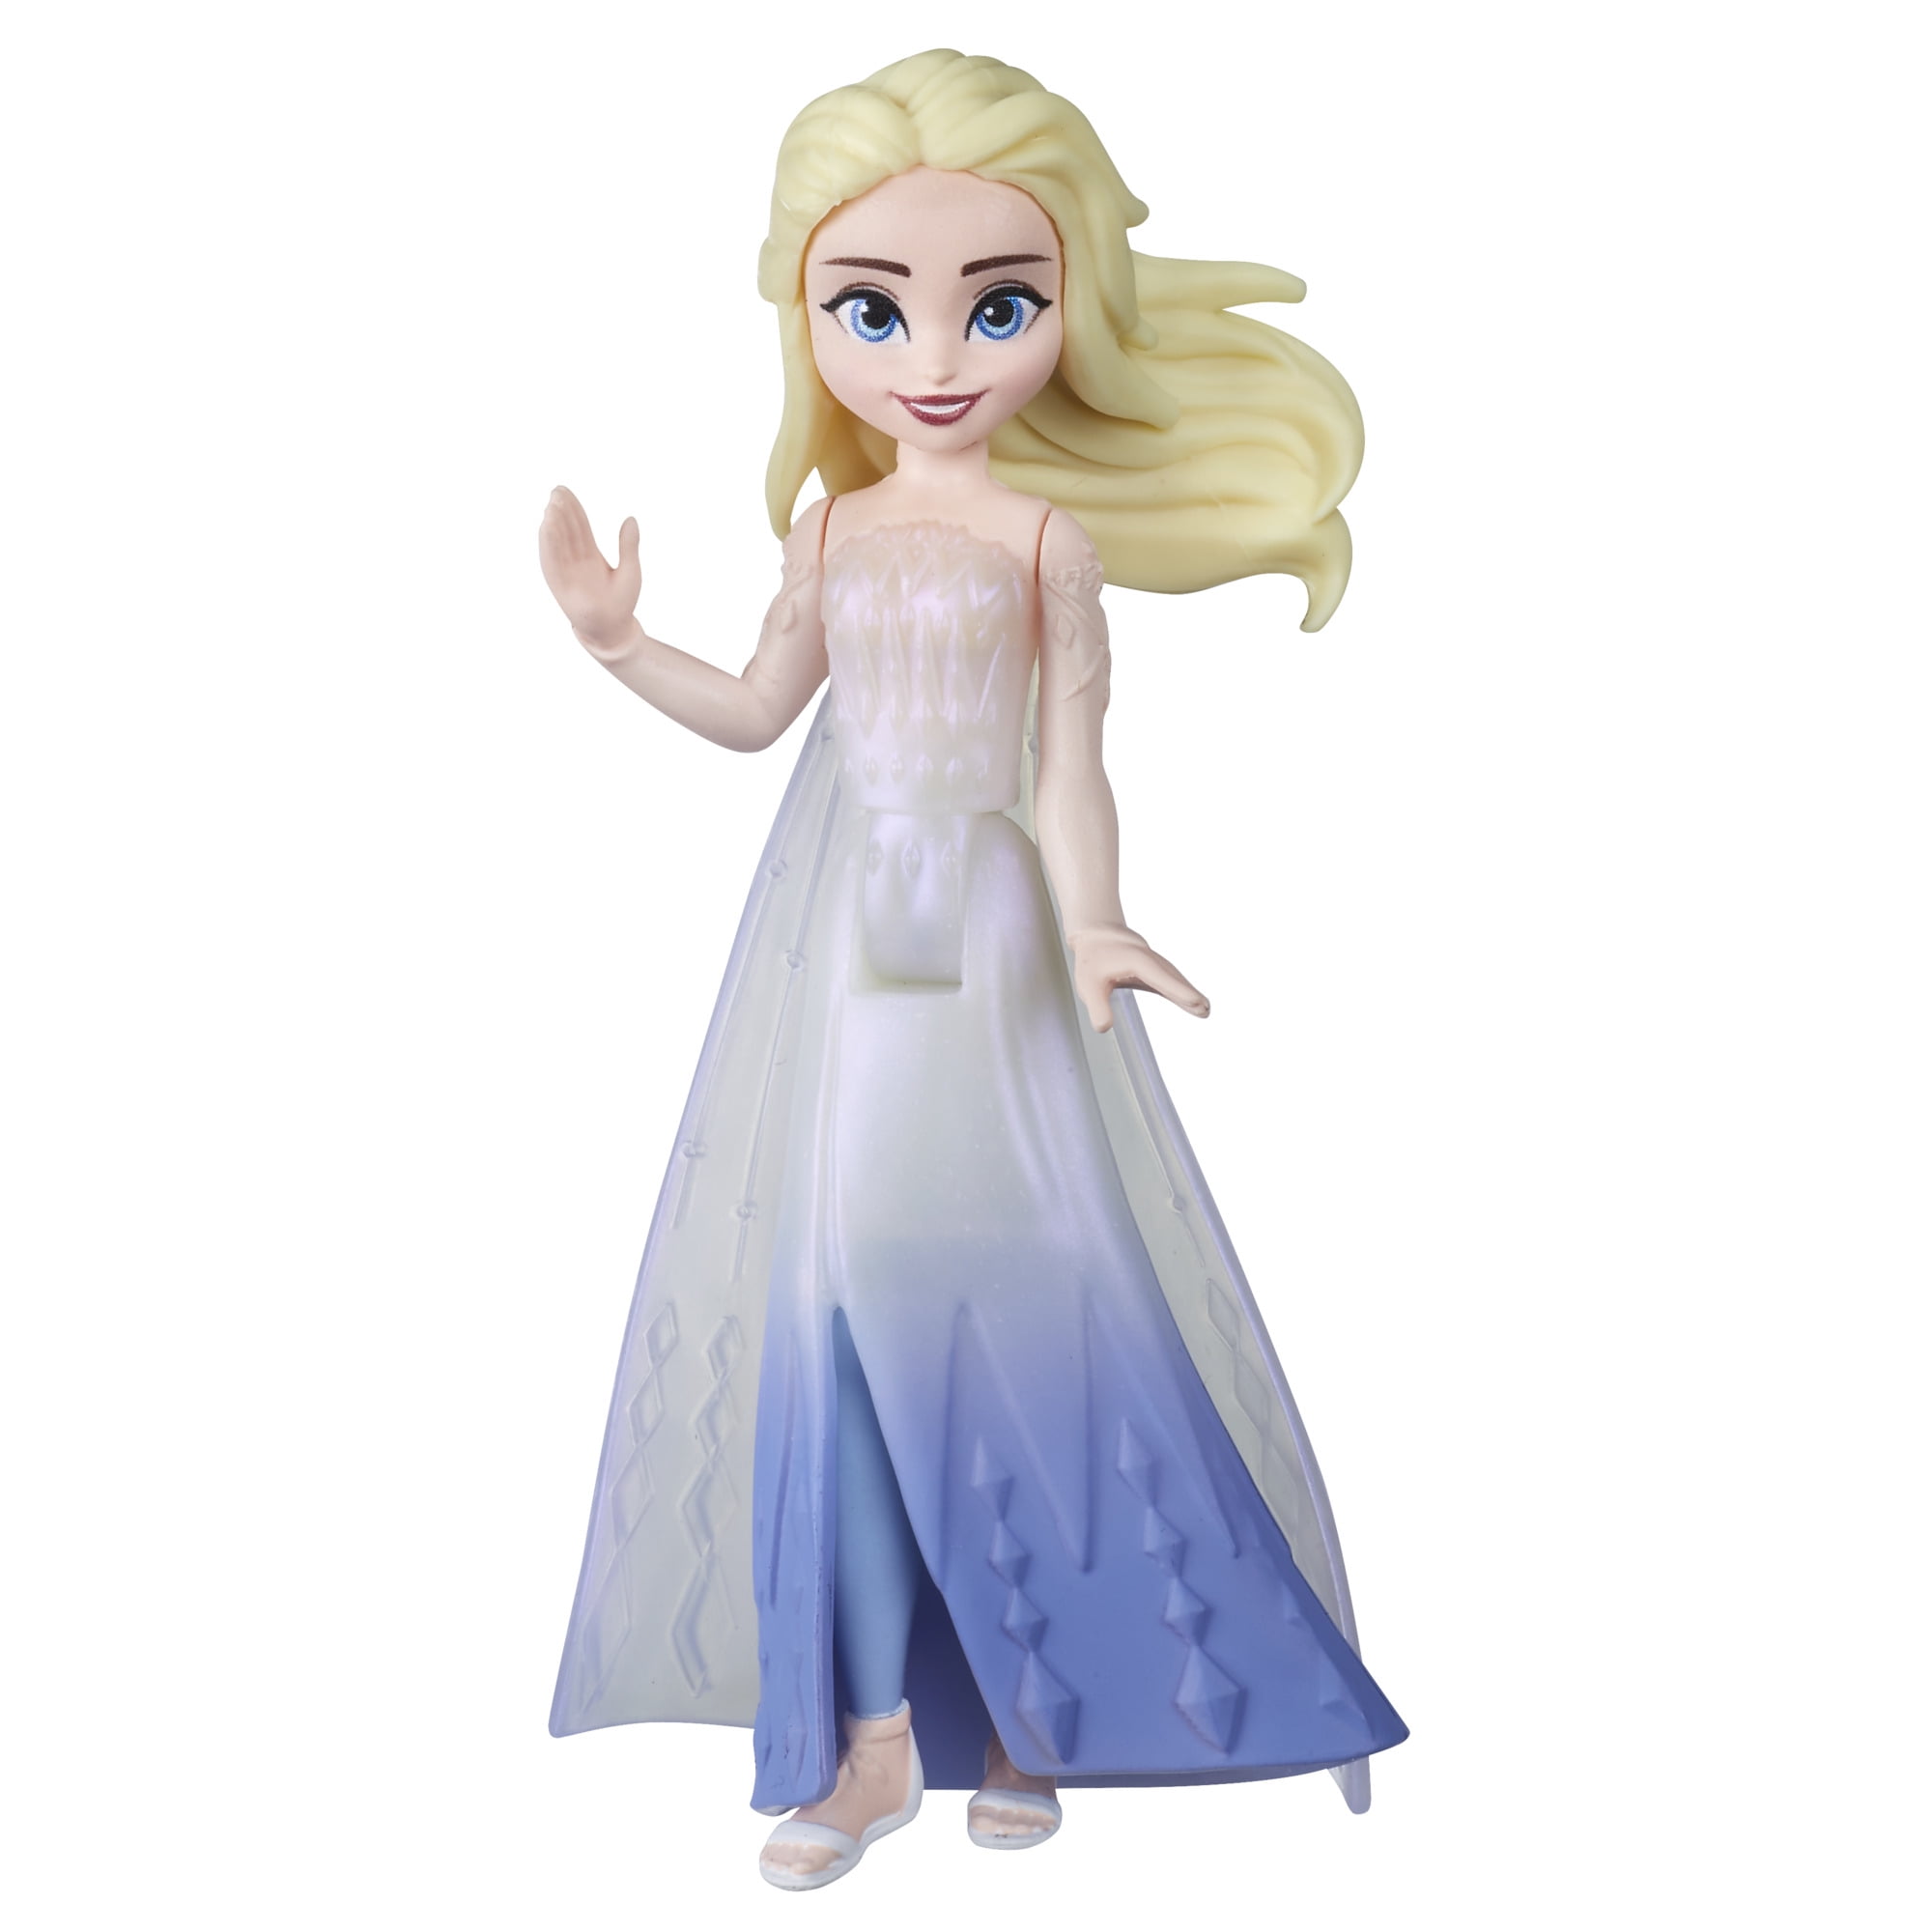 Disney Frozen 2 Queen Elsa Small Doll with Removable Cape Gift Kids Toy